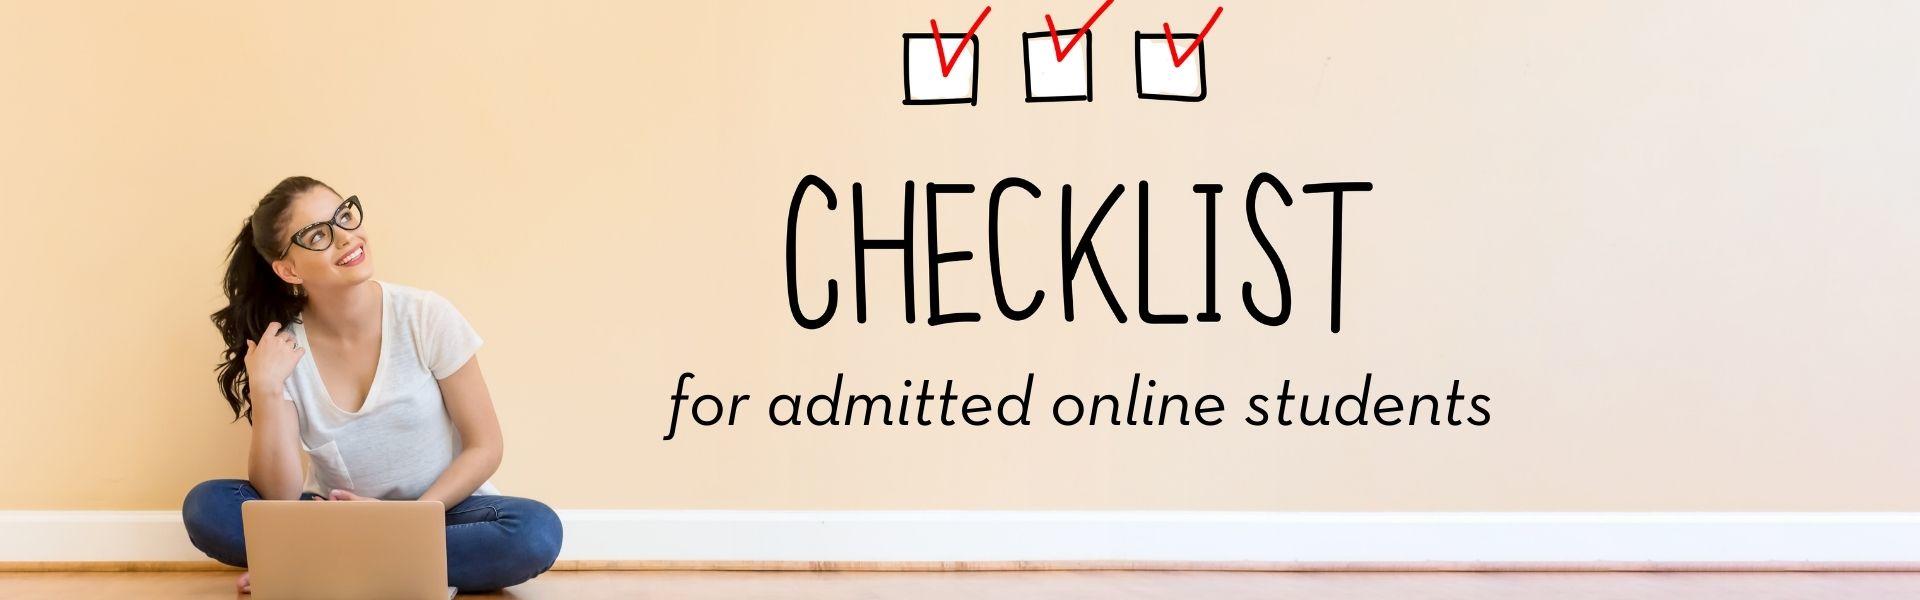 Checklist for admitted online students